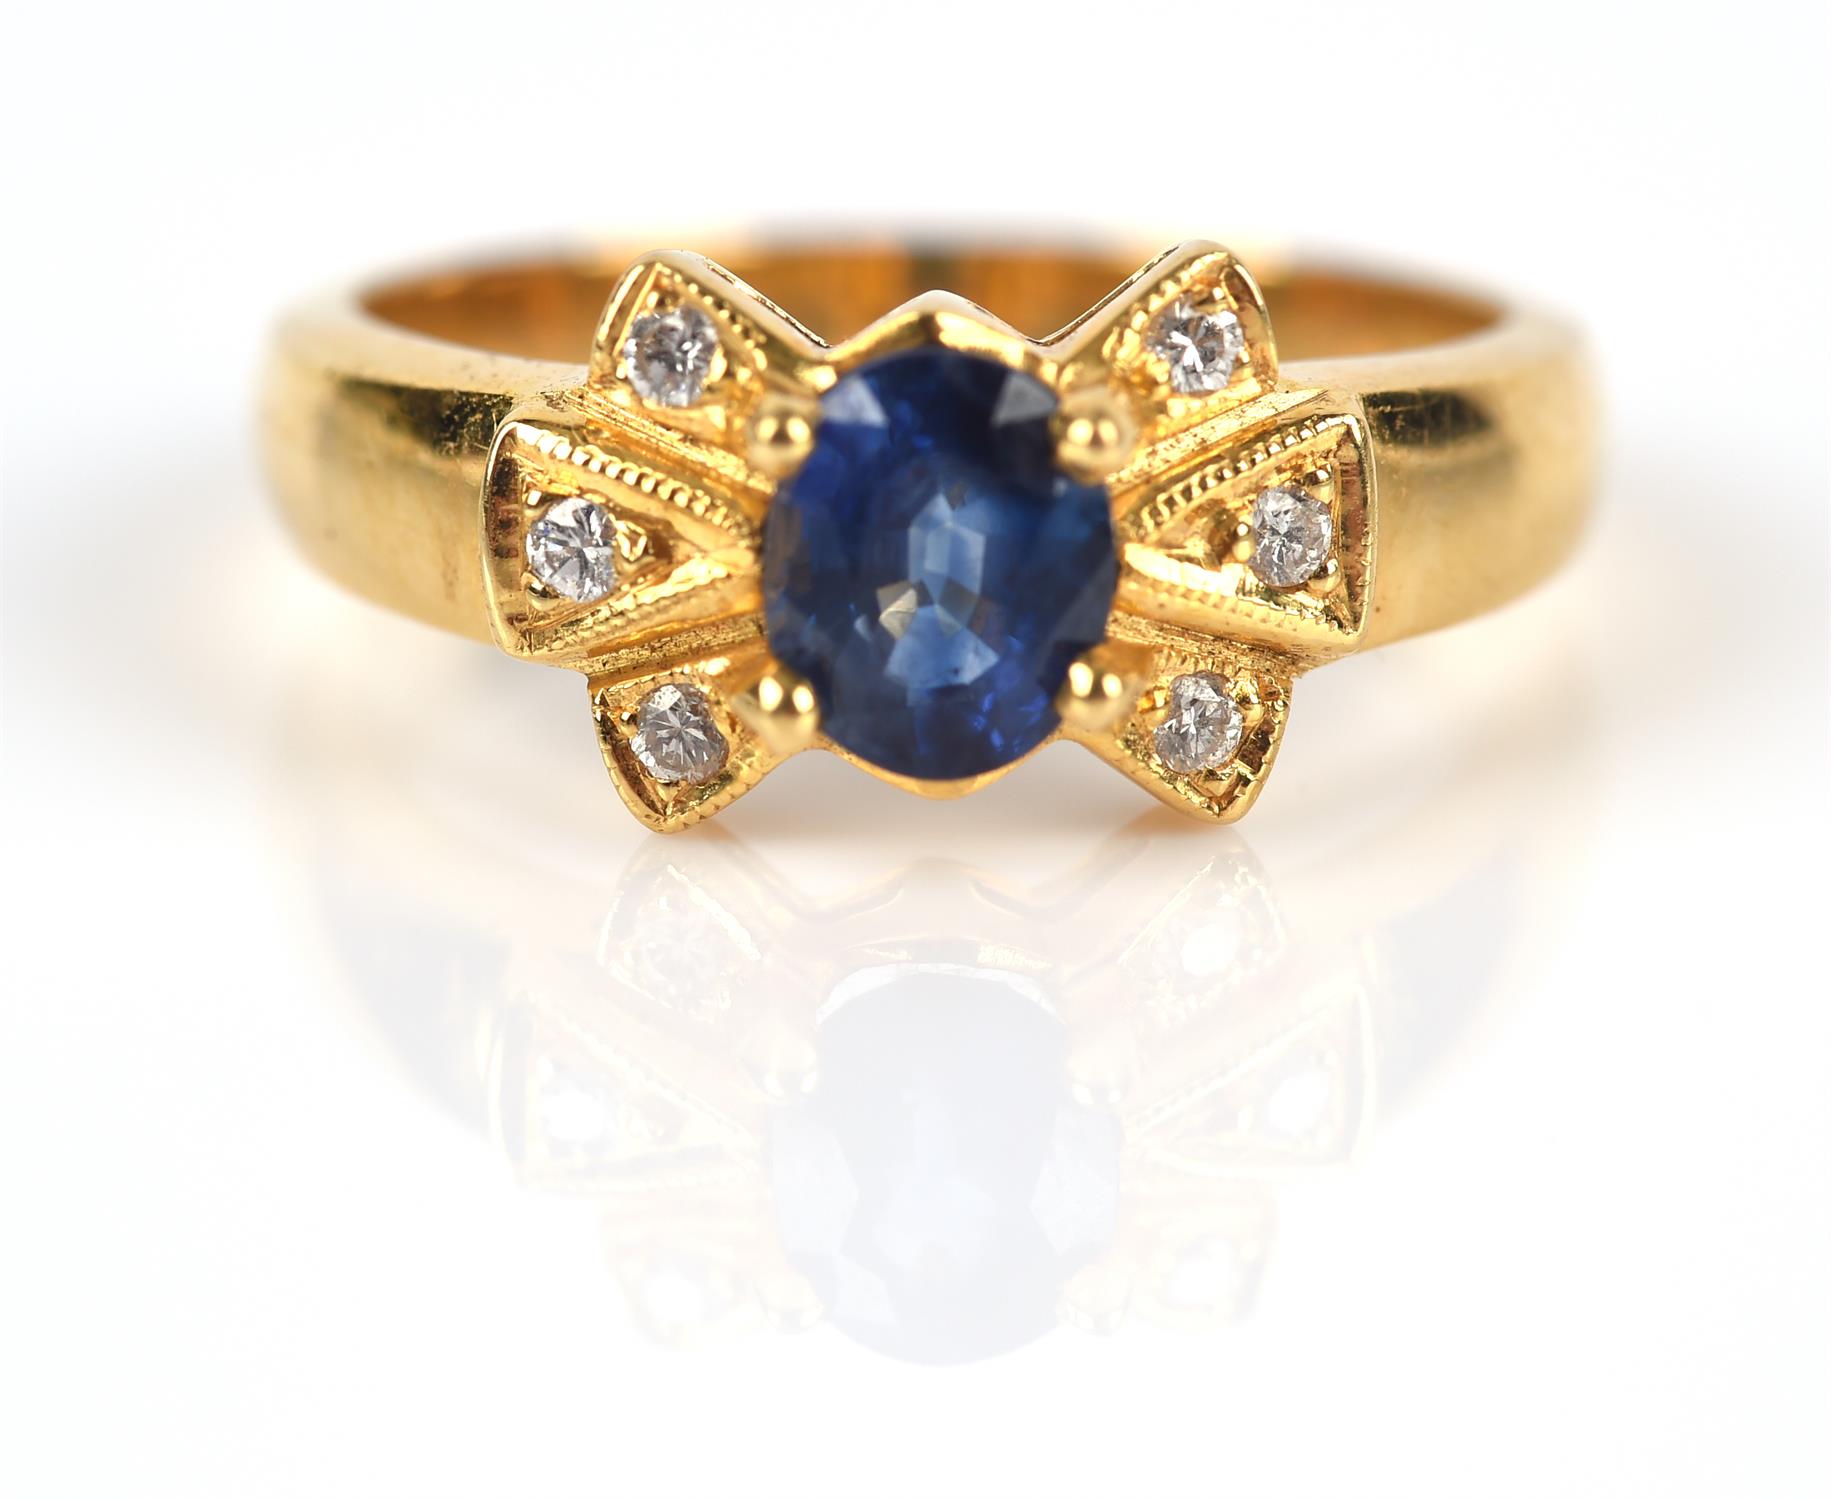 Modern sapphire and diamond ring, central claw set oval cut sapphire weighing an estimated 0.